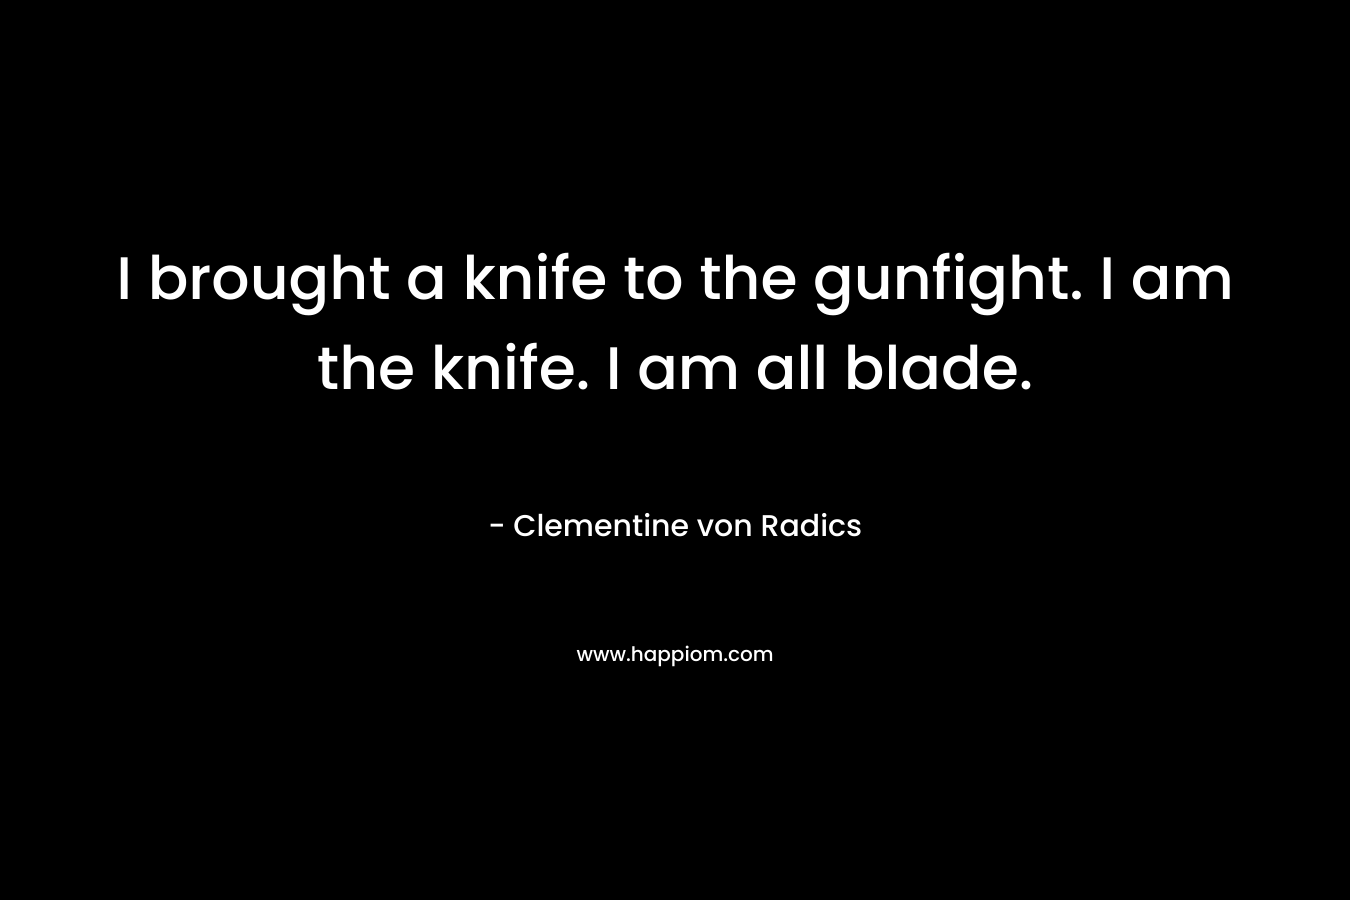 I brought a knife to the gunfight. I am the knife. I am all blade.